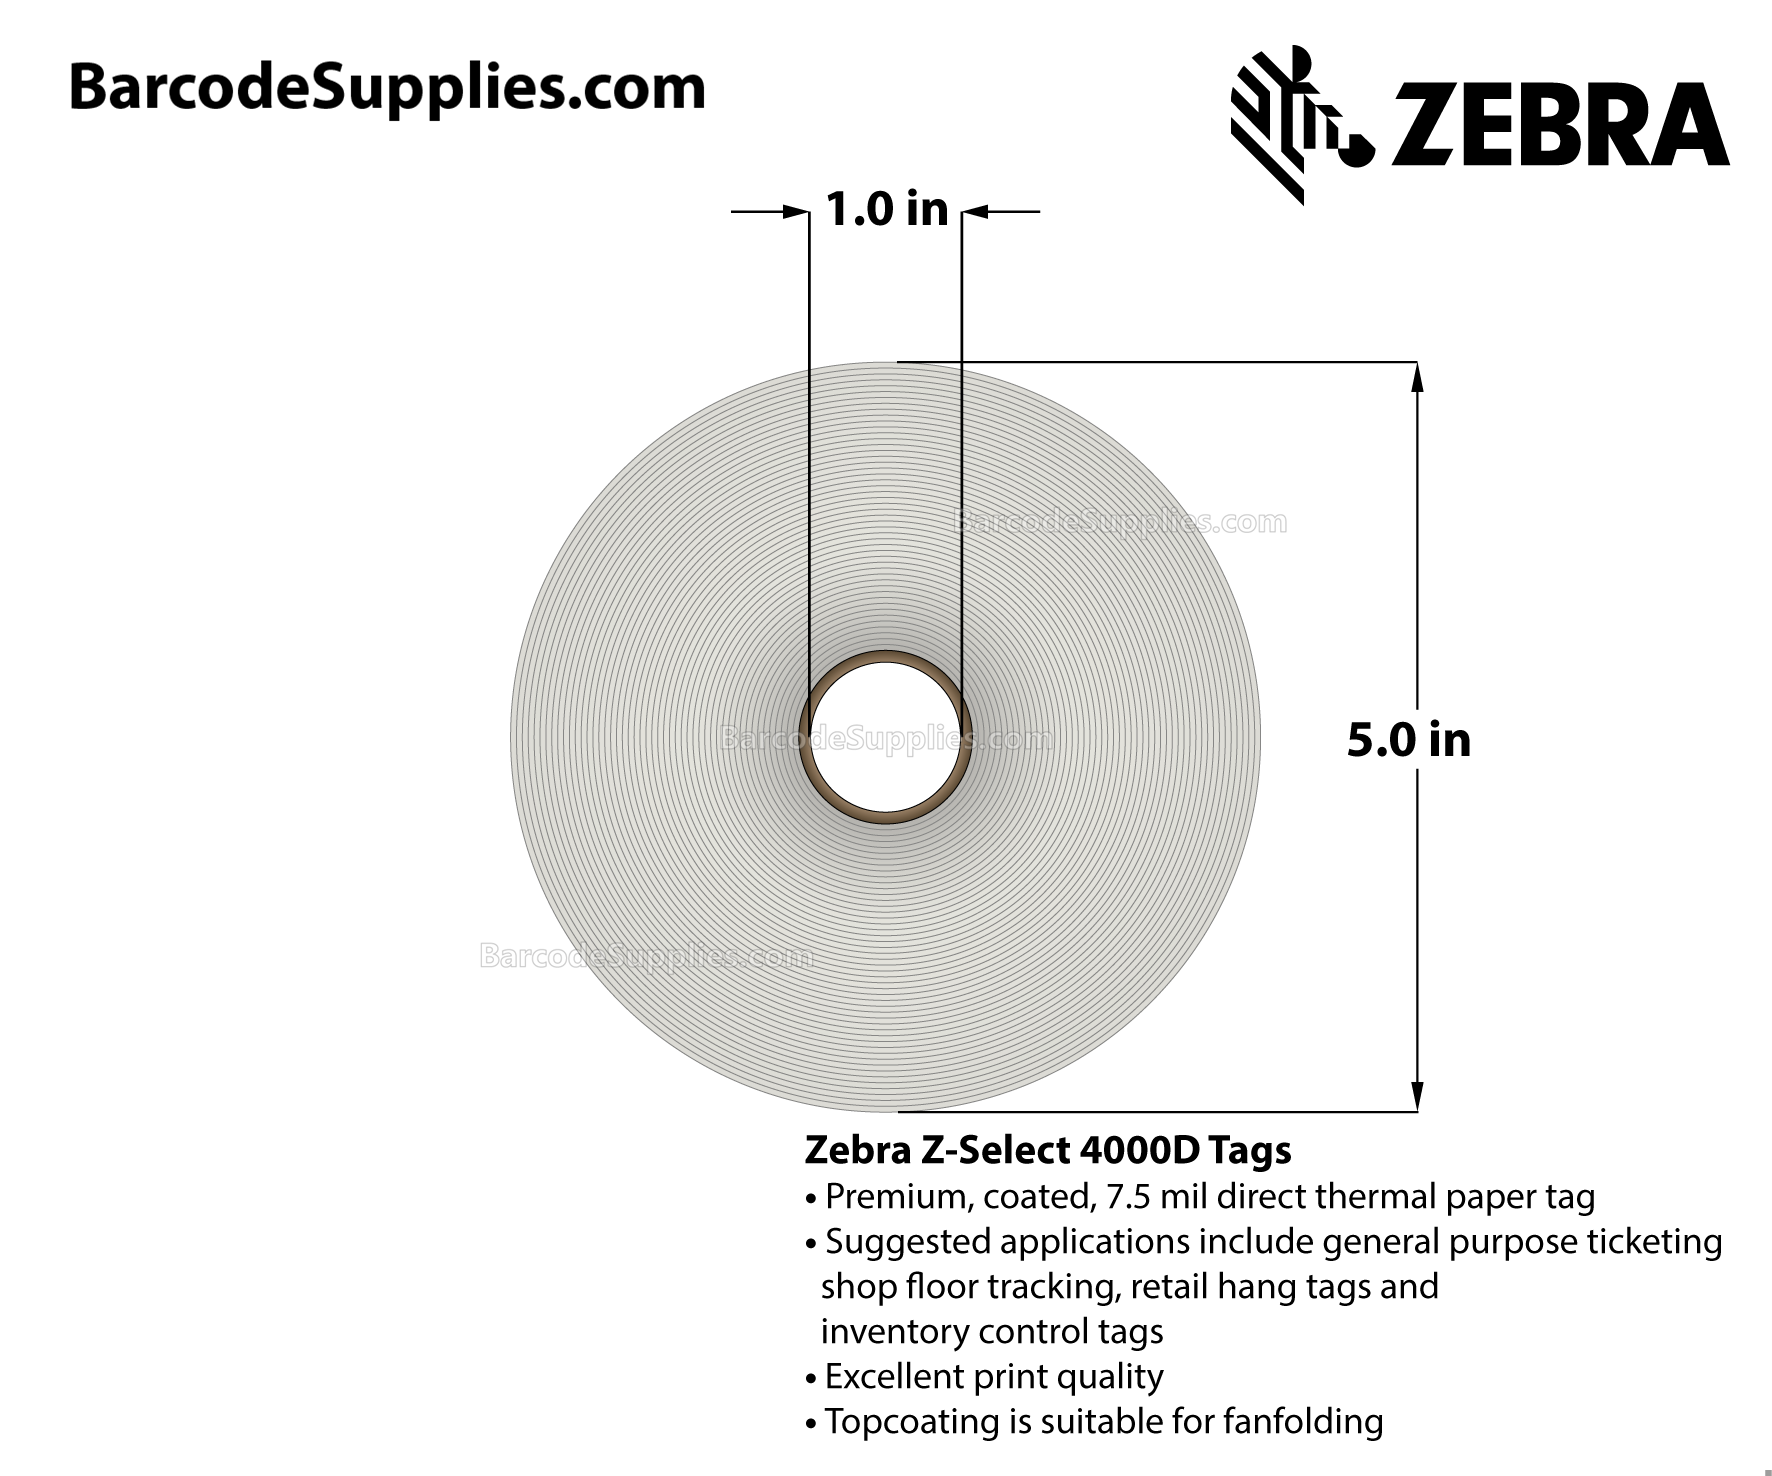 4 x 6 Direct Thermal White Z-Select 4000D 7 mil Tag Tags With No Adhesive - Contains sensing notch - Perforated - 365 Tags Per Roll - Carton Of 4 Rolls - 1460 Tags Total - MPN: 10015364